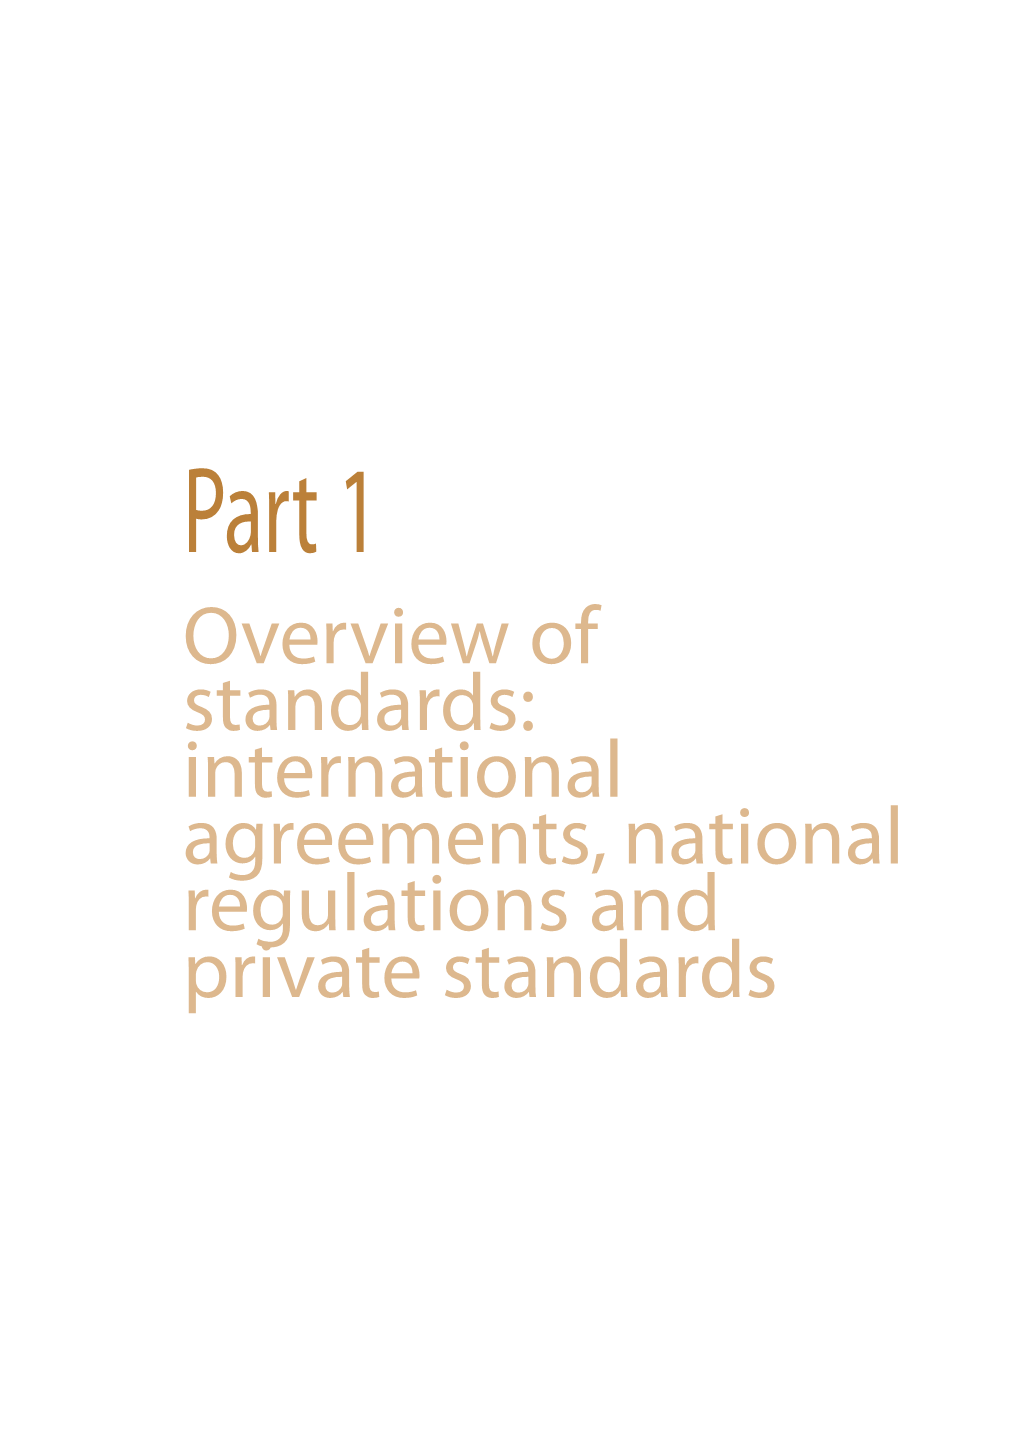 International Agreements, National Regulations and Private Standards